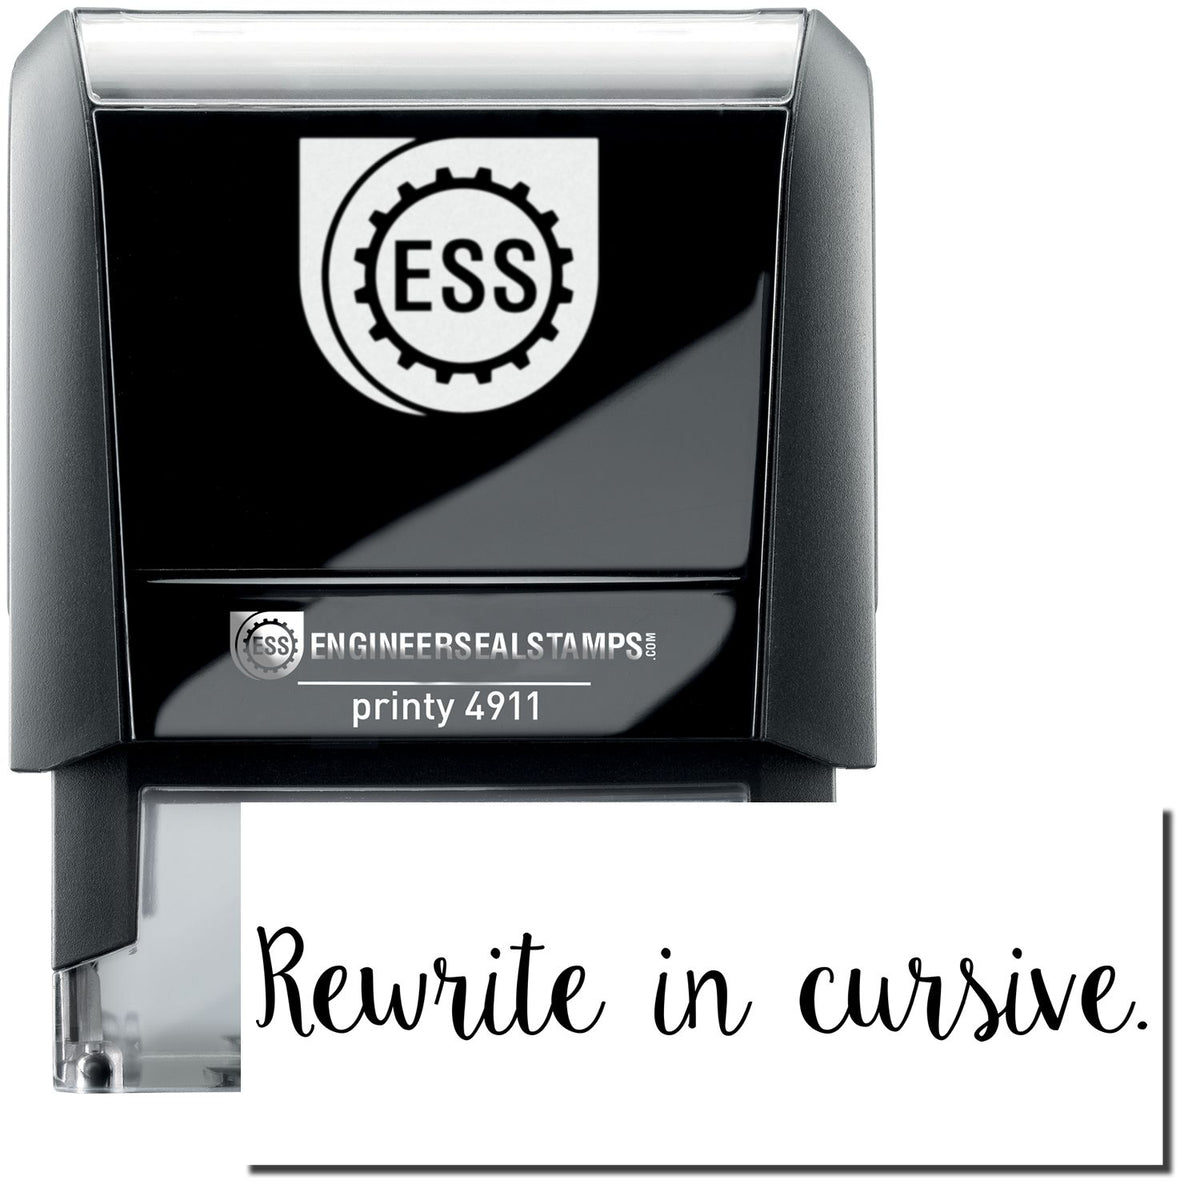 A self-inking stamp with a stamped image showing how the text &quot;Rewrite in cursive.&quot; (in a script cursive font) is displayed after stamping.